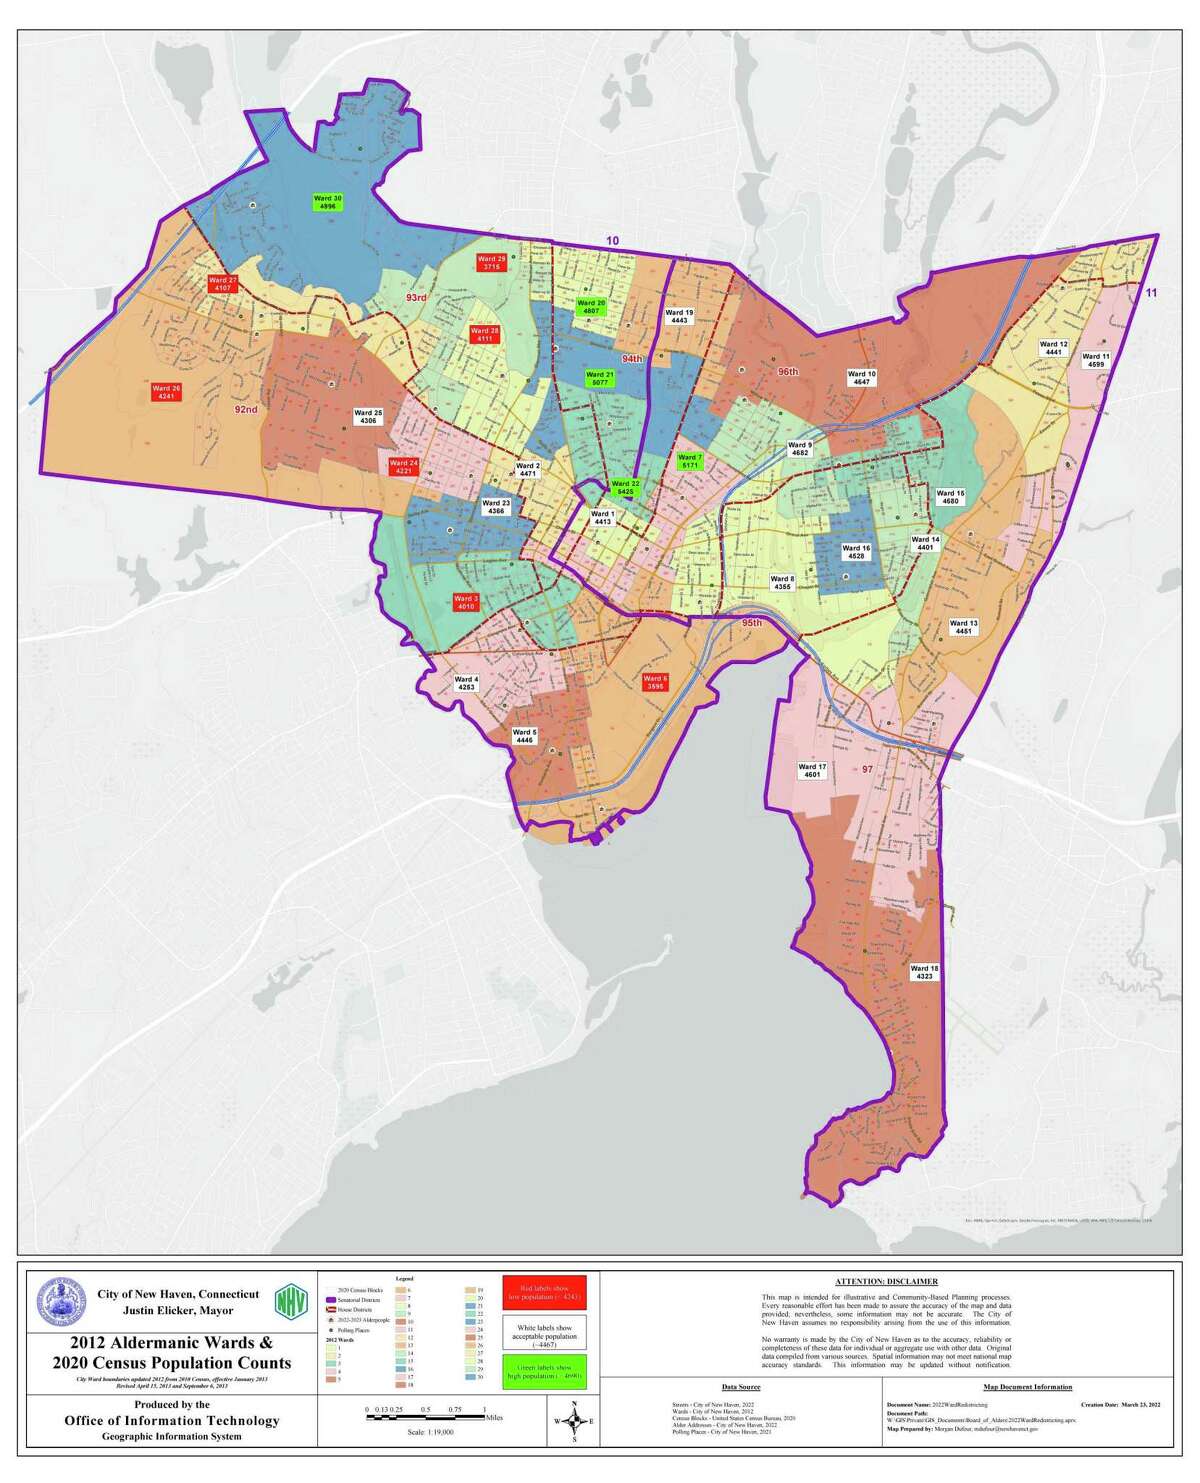 This is the map of the city wards. The red label indicates one that has low population necessitating more streets added to bring it closer to the average population. The white label means that ward's boundary lines will stay the same. The green label means a ward will lose residents as it currently has a high population.